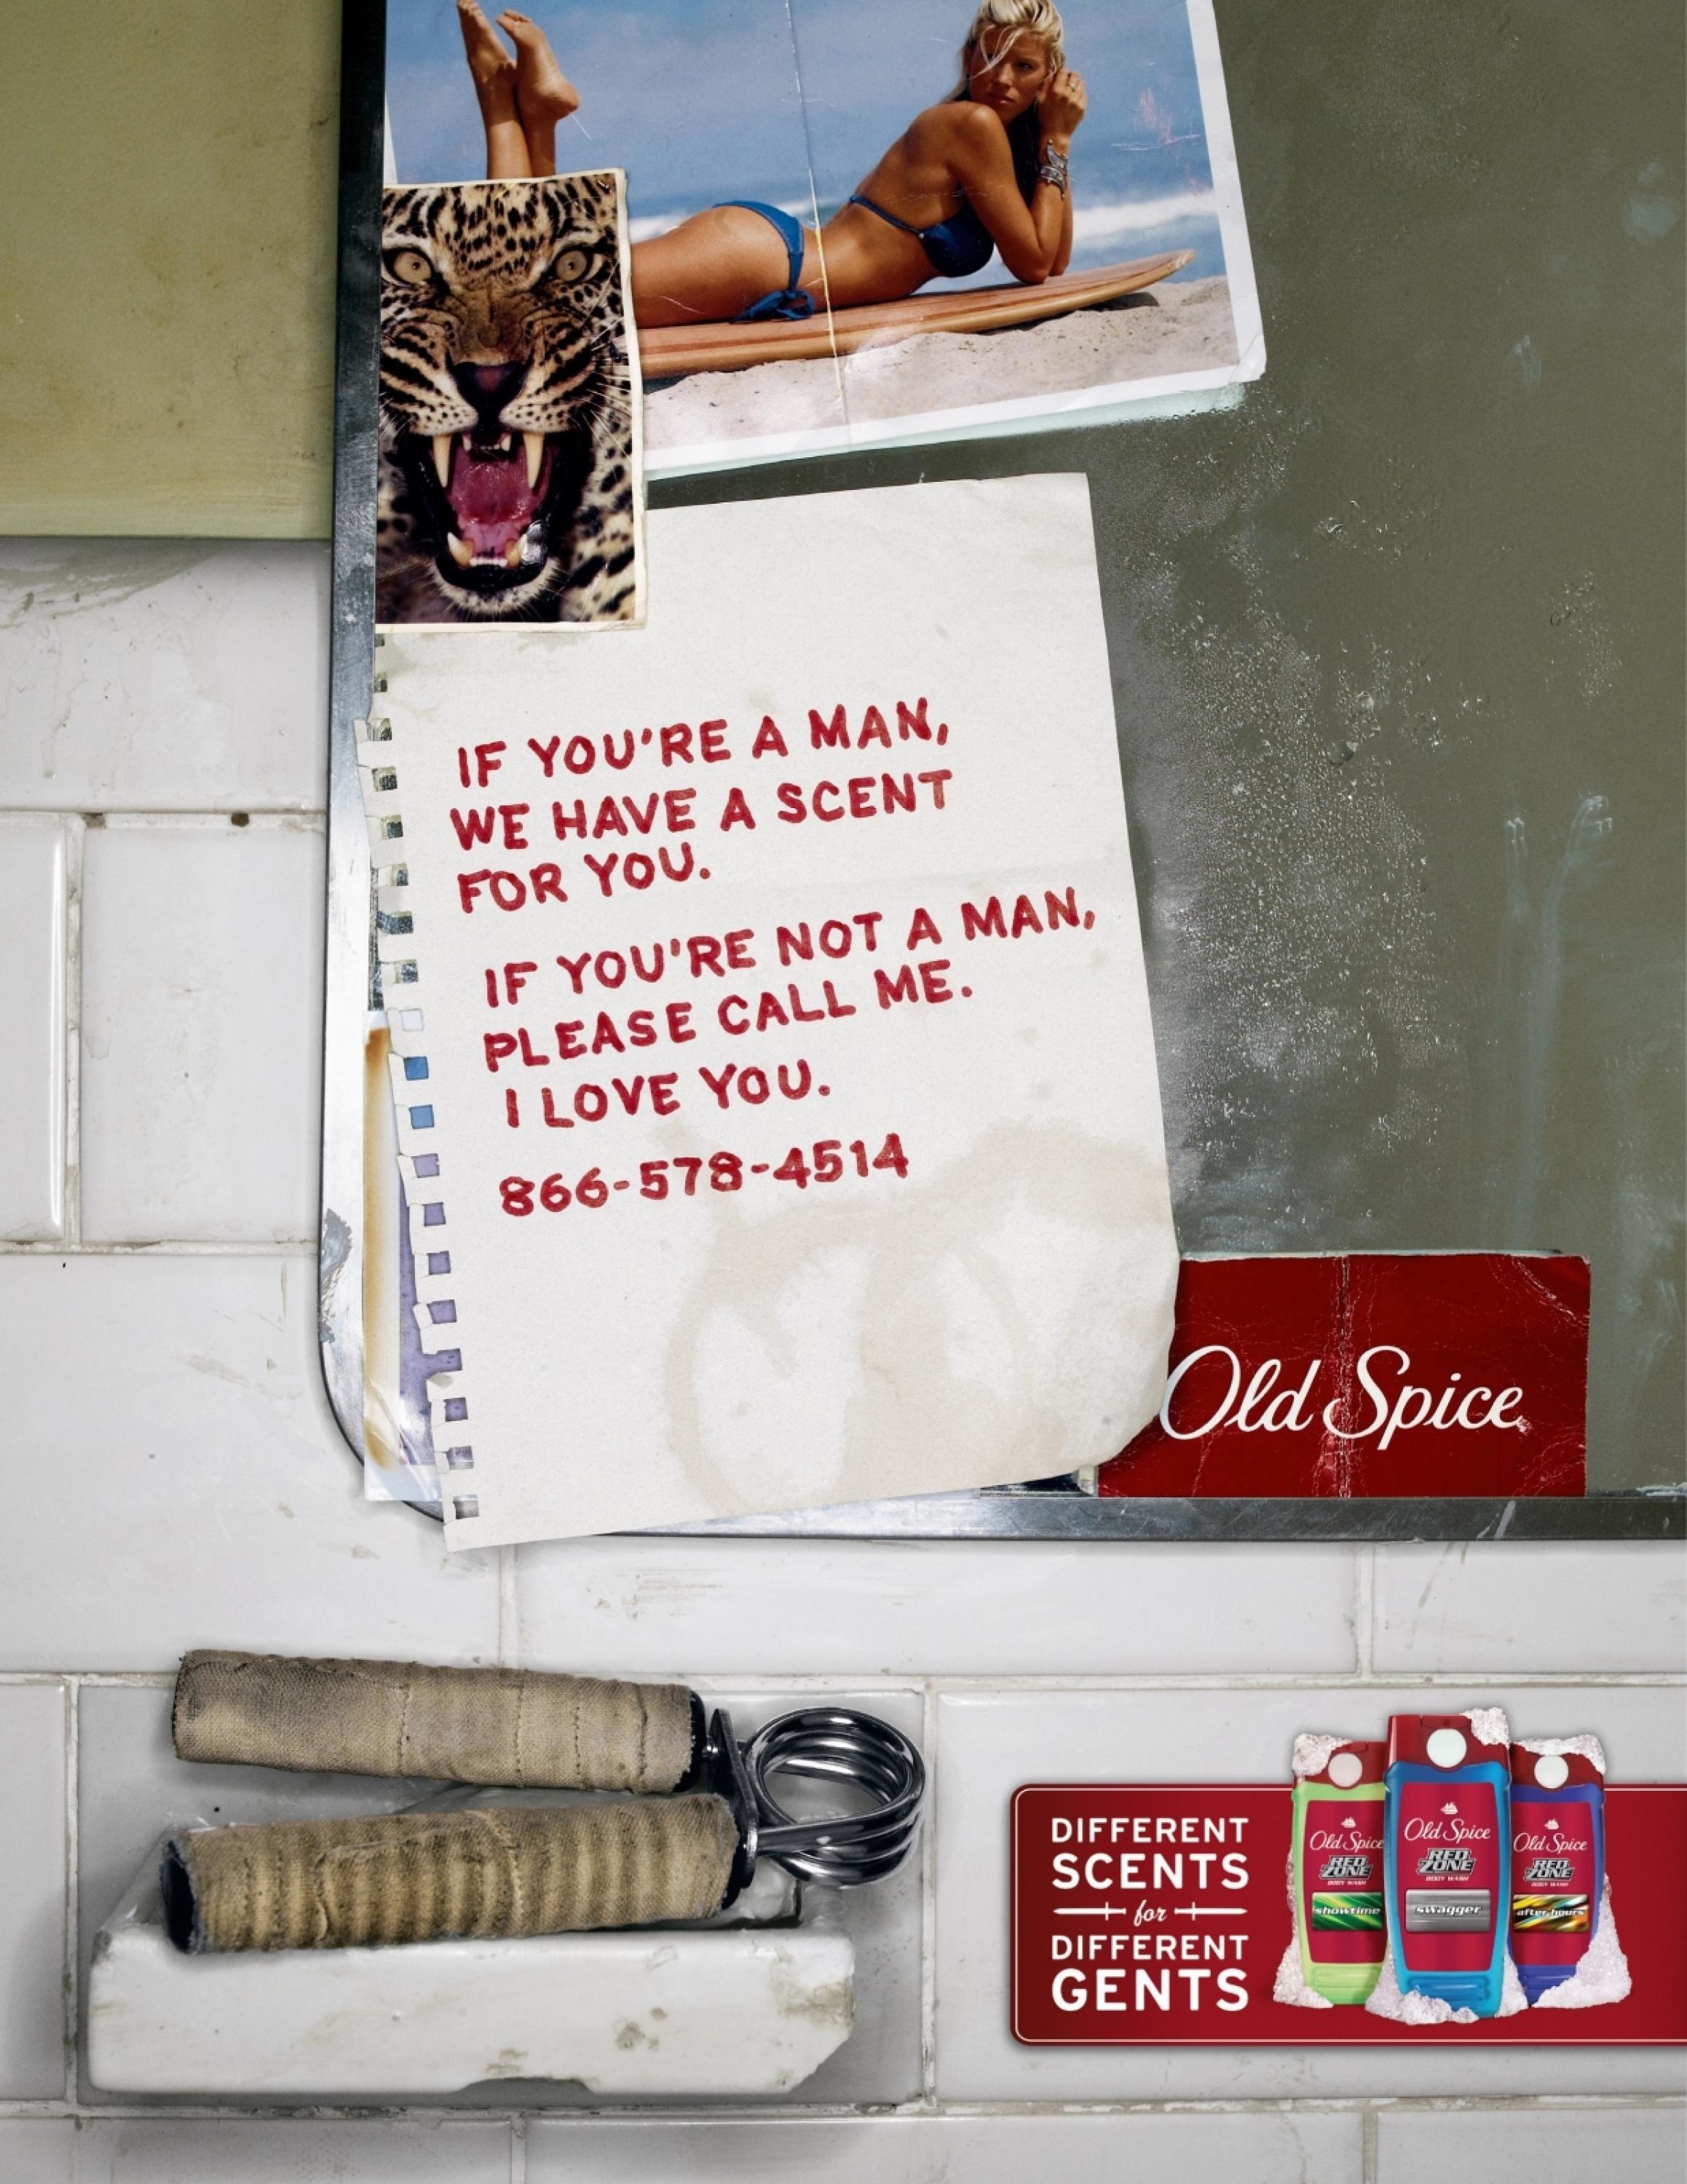 OLD SPICE BODY WASH